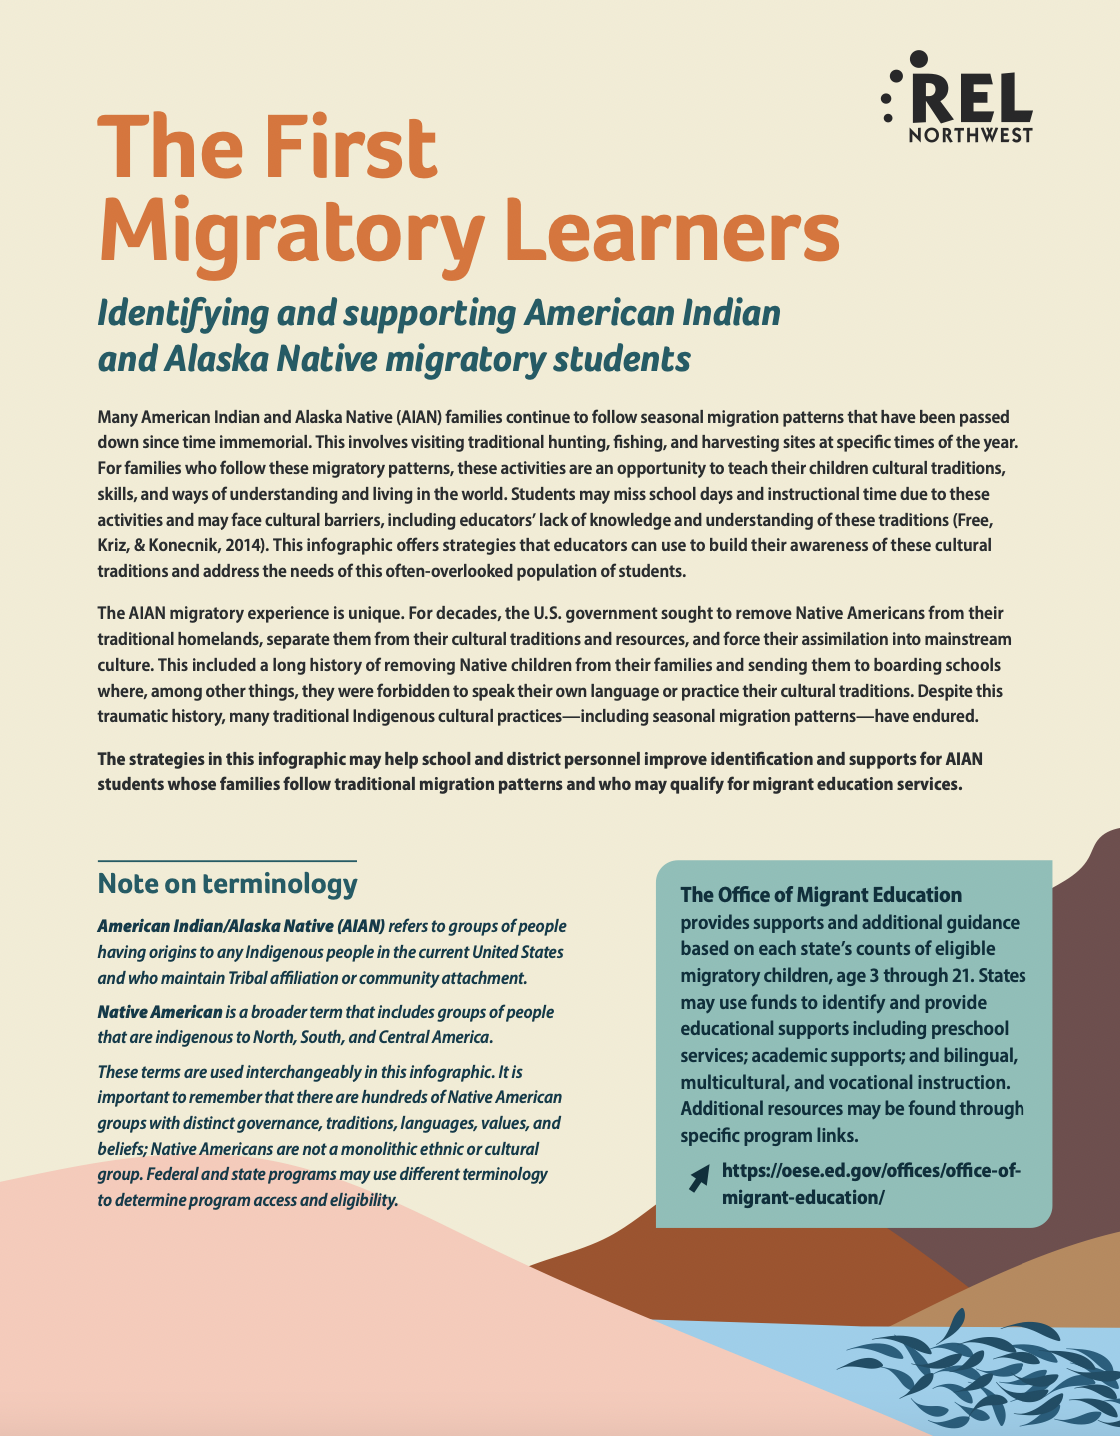 The First Migratory Learners_Identifying and Supporting American Indian and Alaska Native Migratory Students